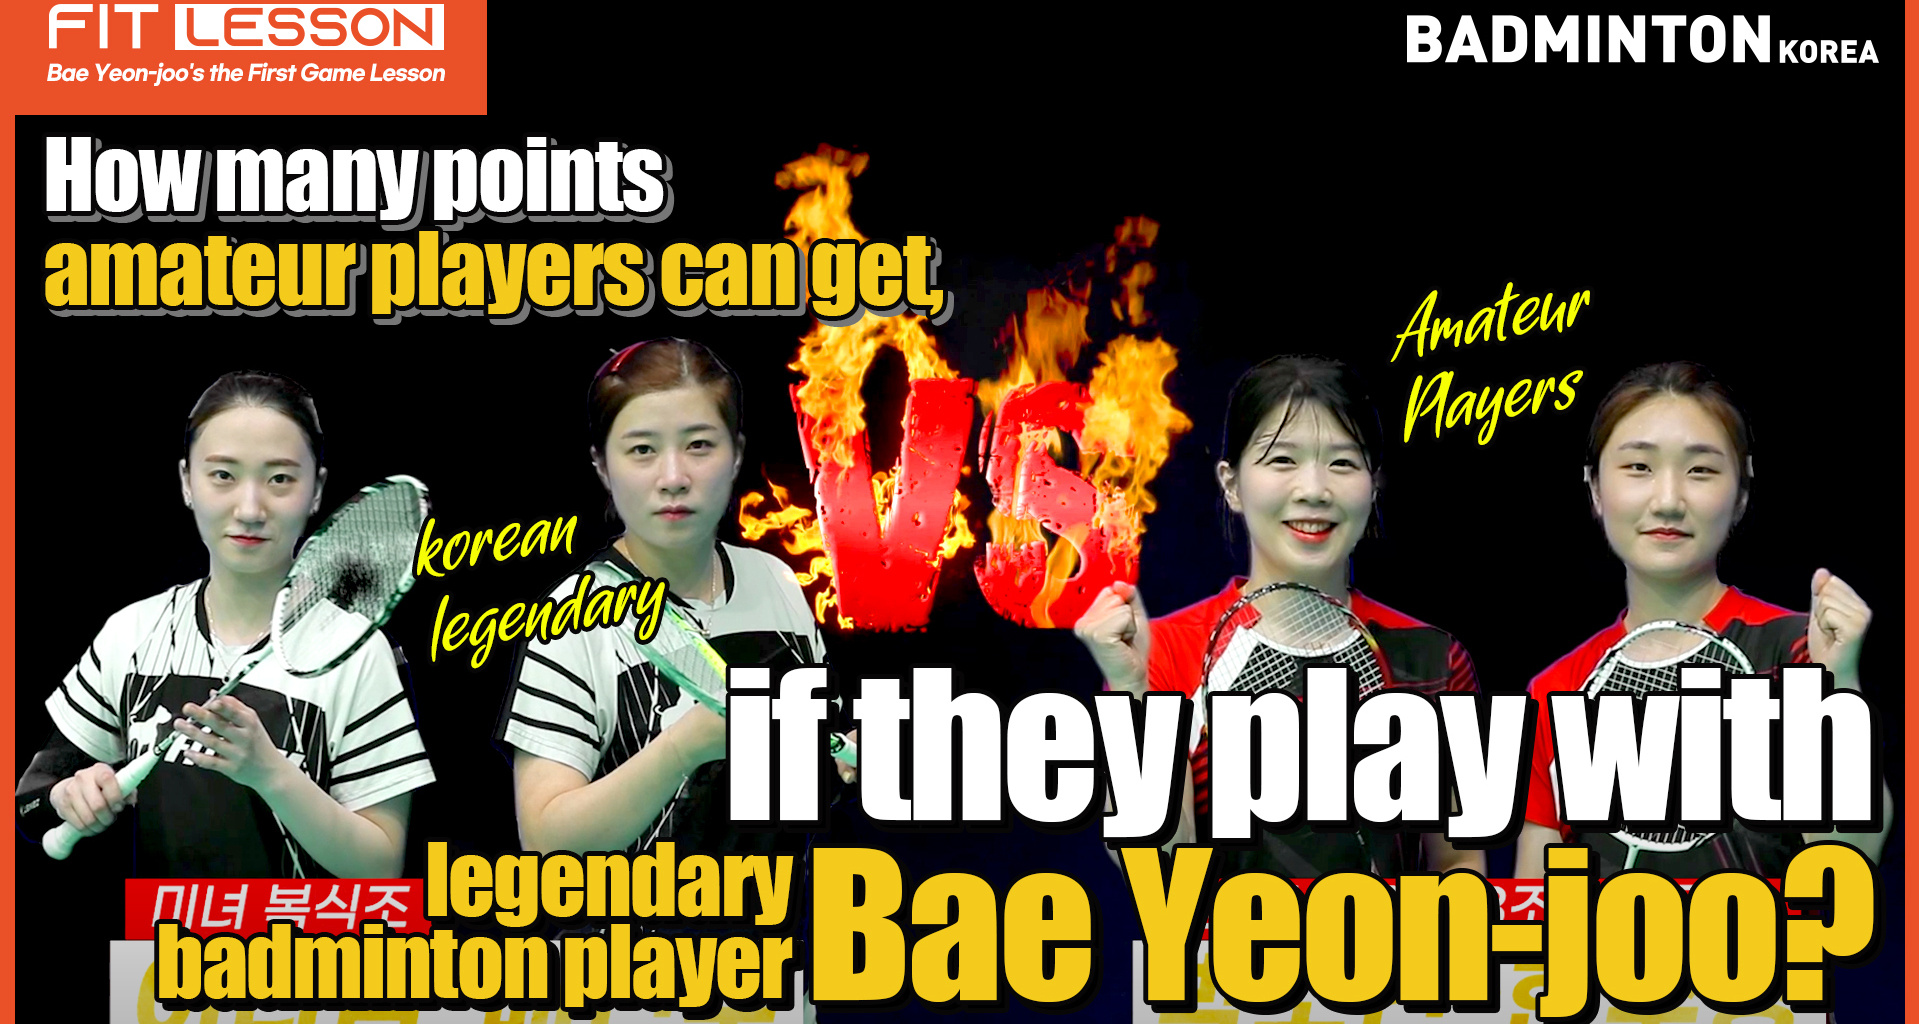 Retired Korean singles star Bae Yeon Ju has released a series of game lesson videos where she directly corrects incorrect form, strokes, and habits of recreational players by playing directly […]